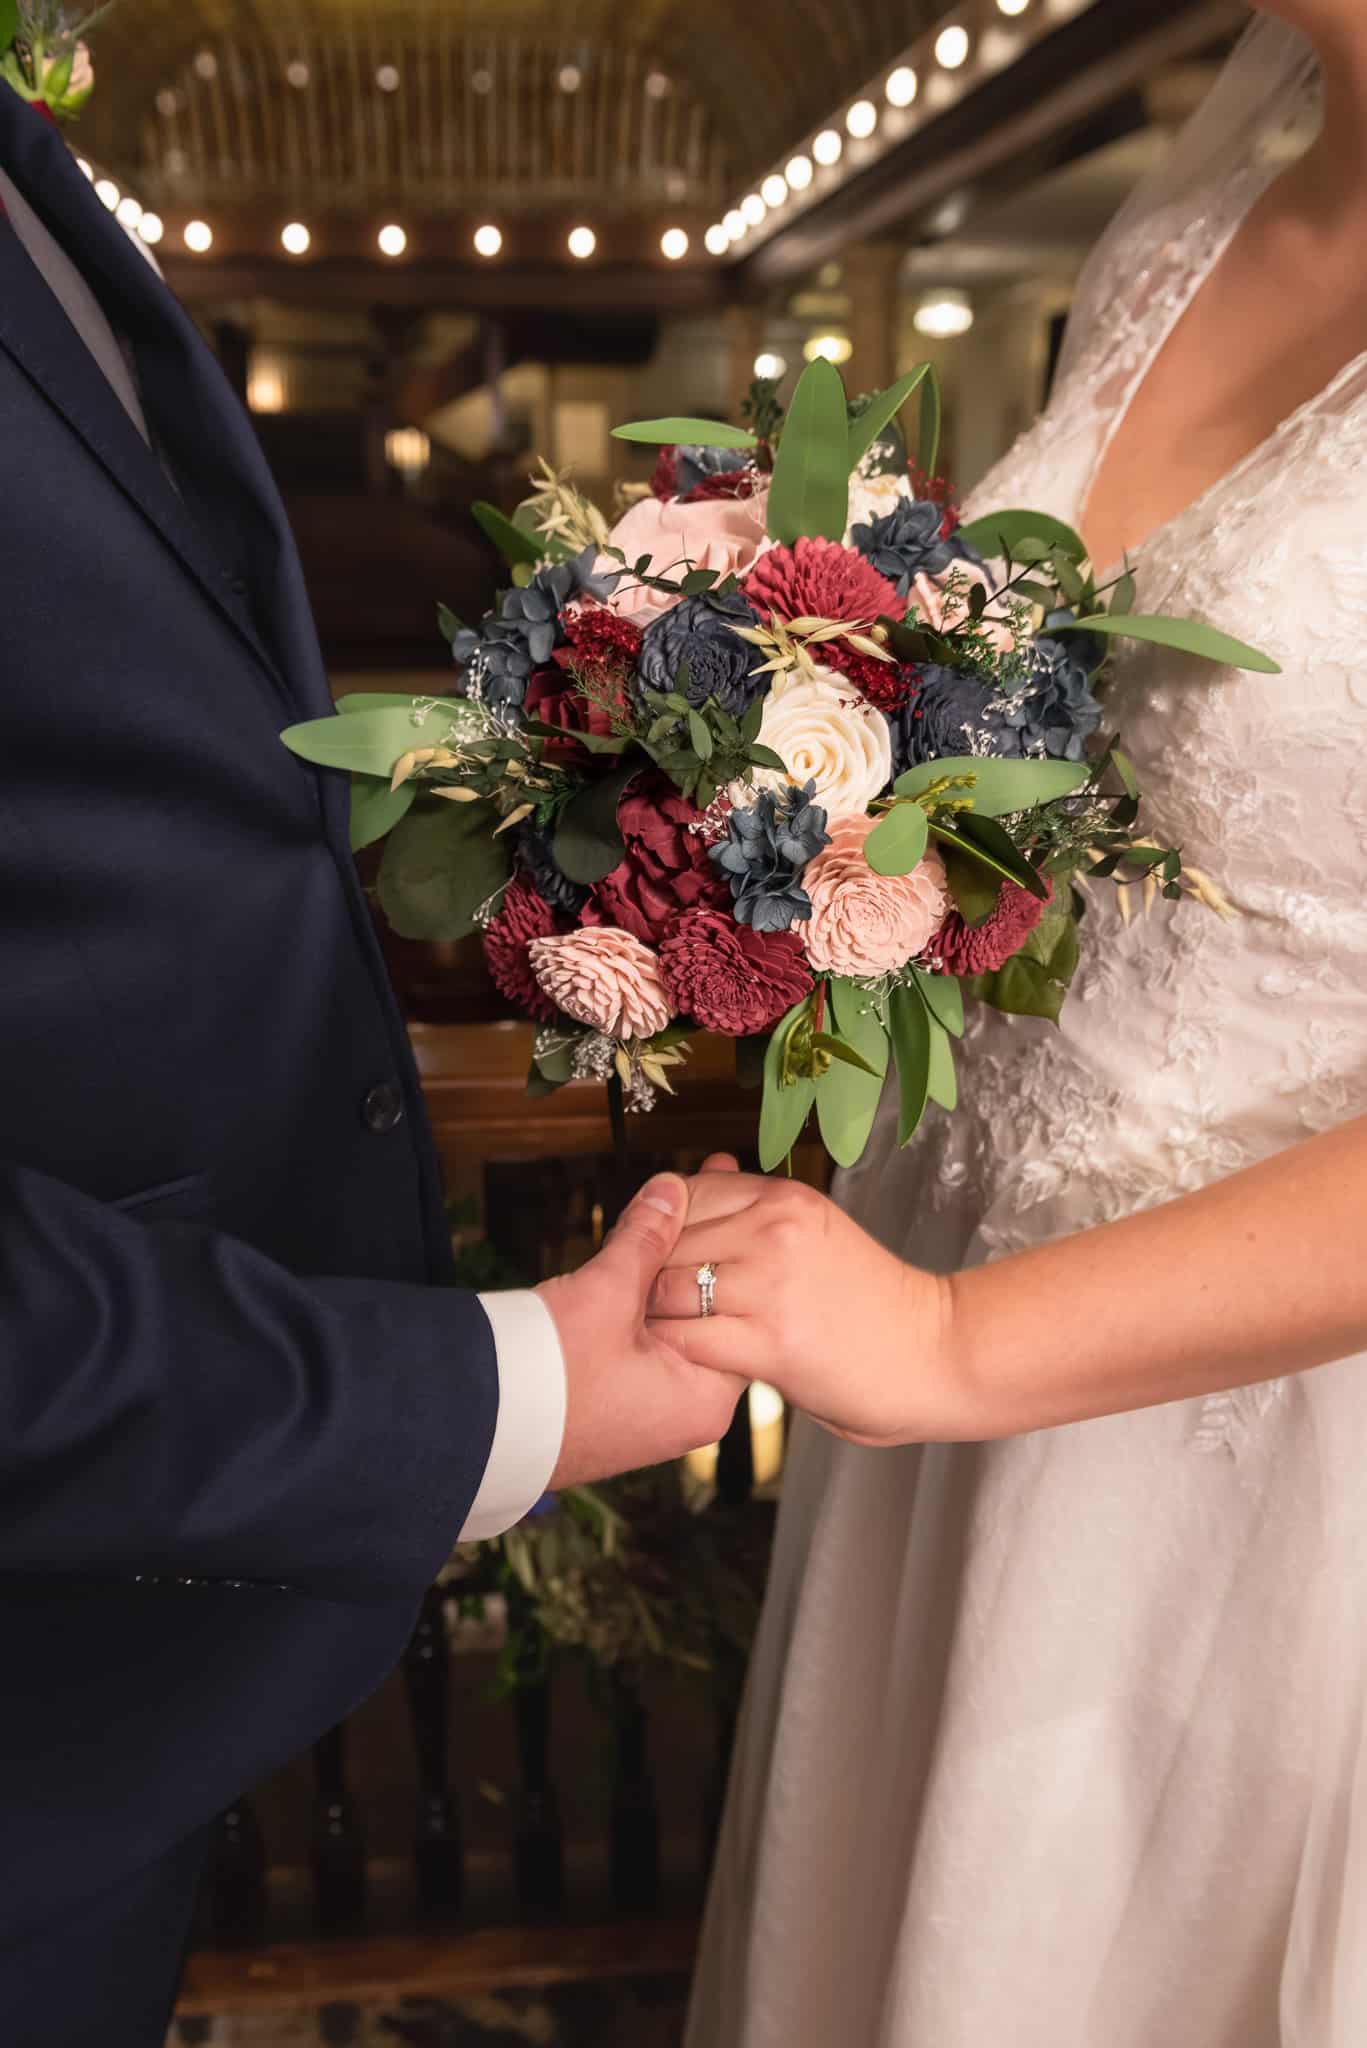 Close up of a bridal bouquet in varying shades of navy, pink, and deep red.